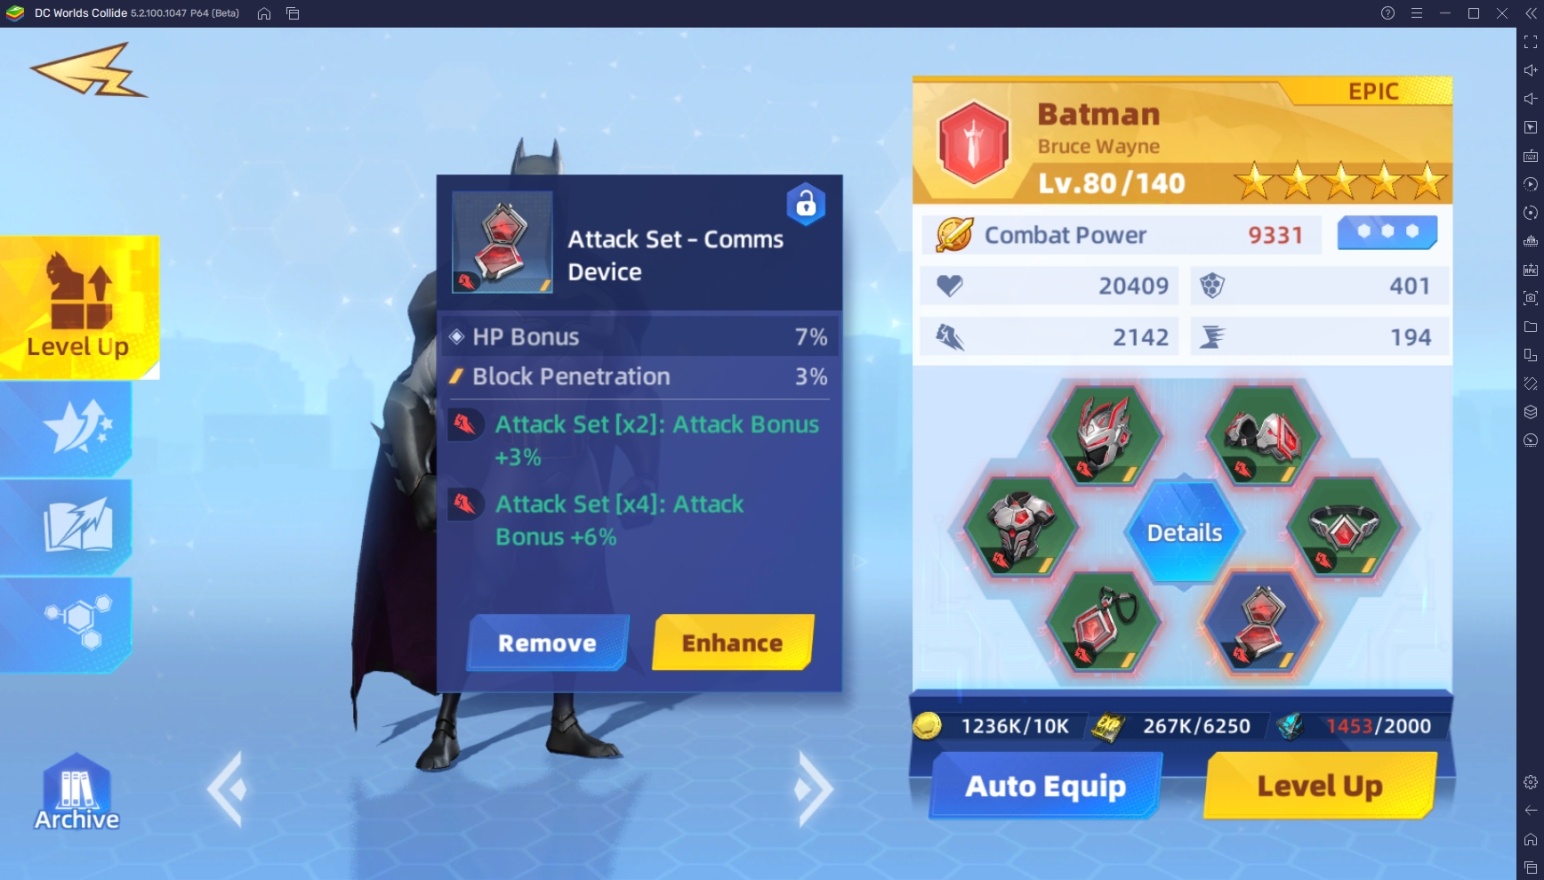 BlueStacks' Beginners Guide to Playing DC Worlds Collide